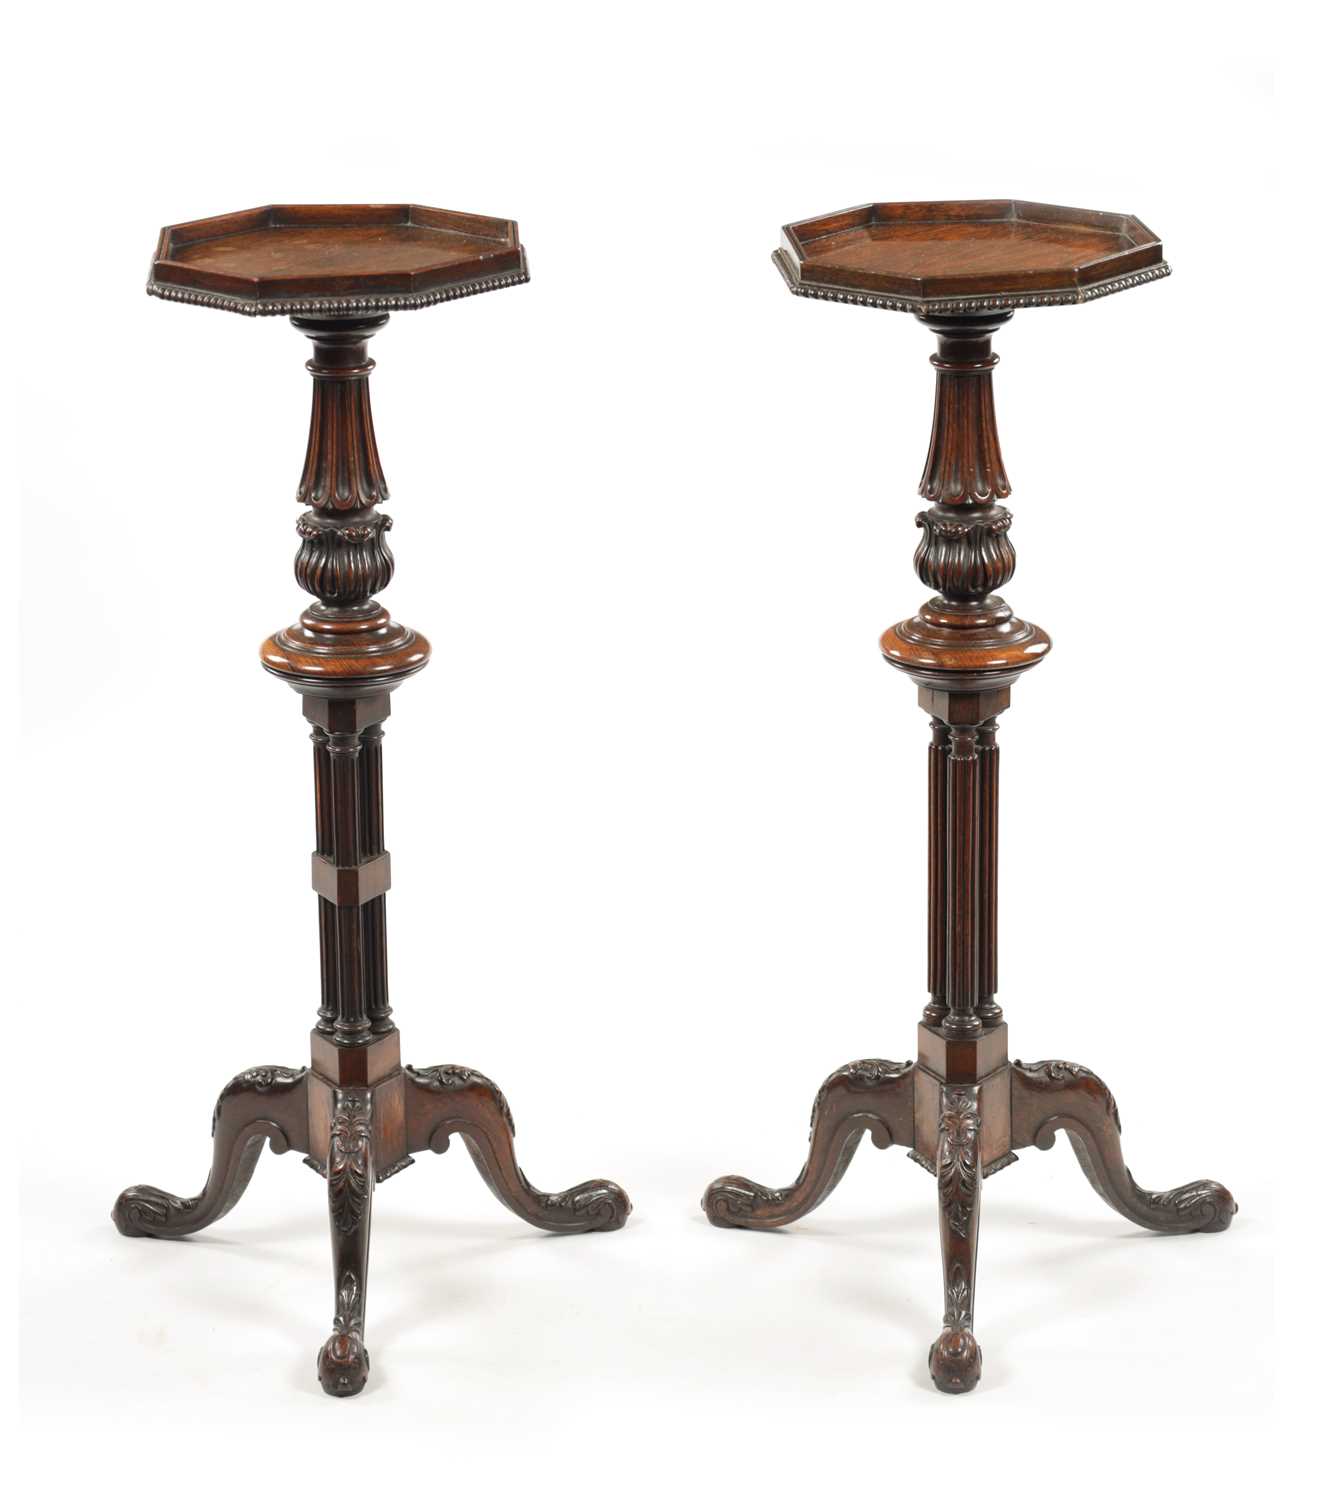 A MATCHED PAIR OF LATE REGENCY ROSEWOOD WINE TABLES IN THE MÄNNER OF GILLOWS